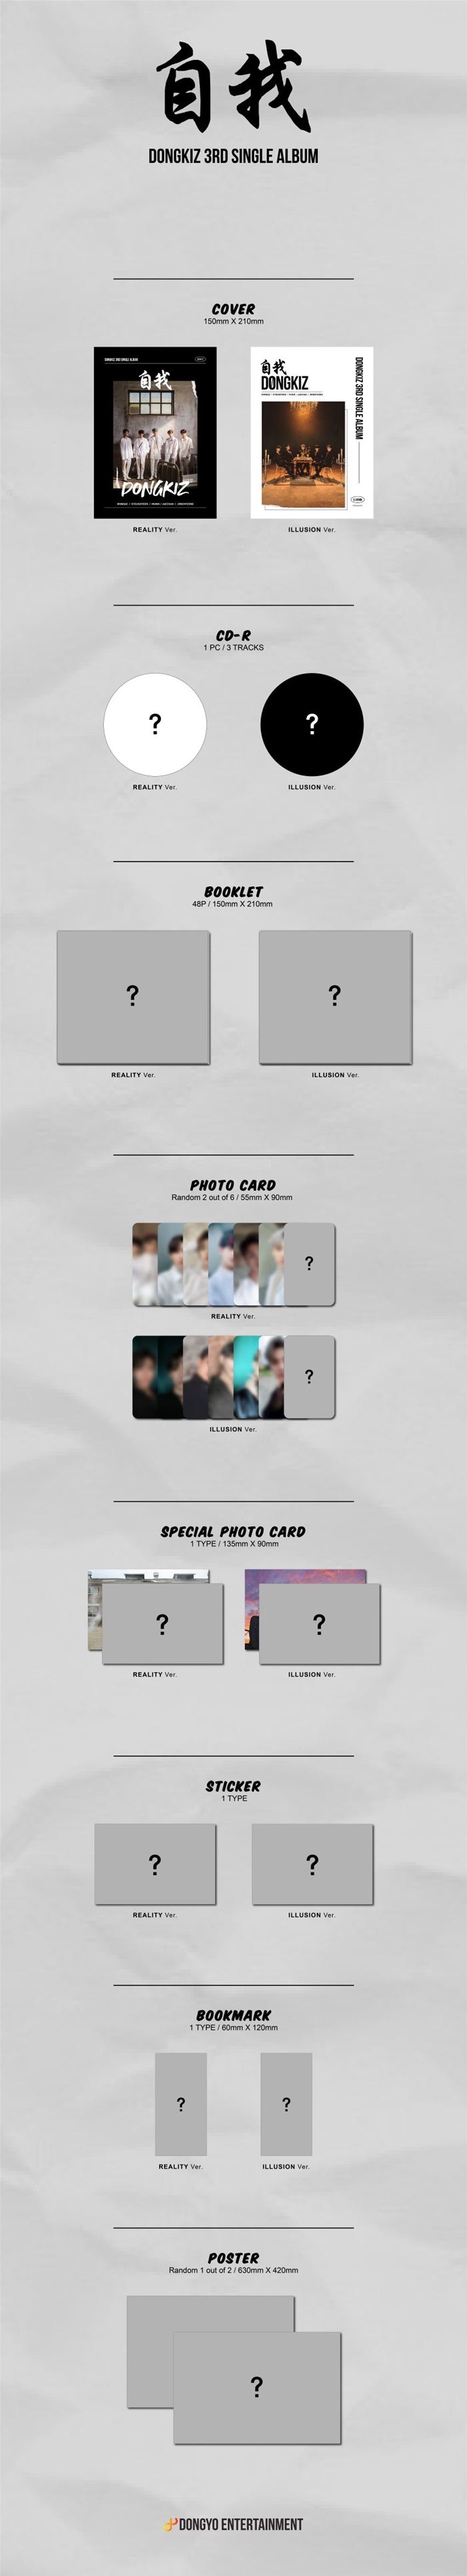 1 CD
1 Booklet (48 pages)
2 Photo Cards
1 Special Photo
1 Sticker
1 Bookmark